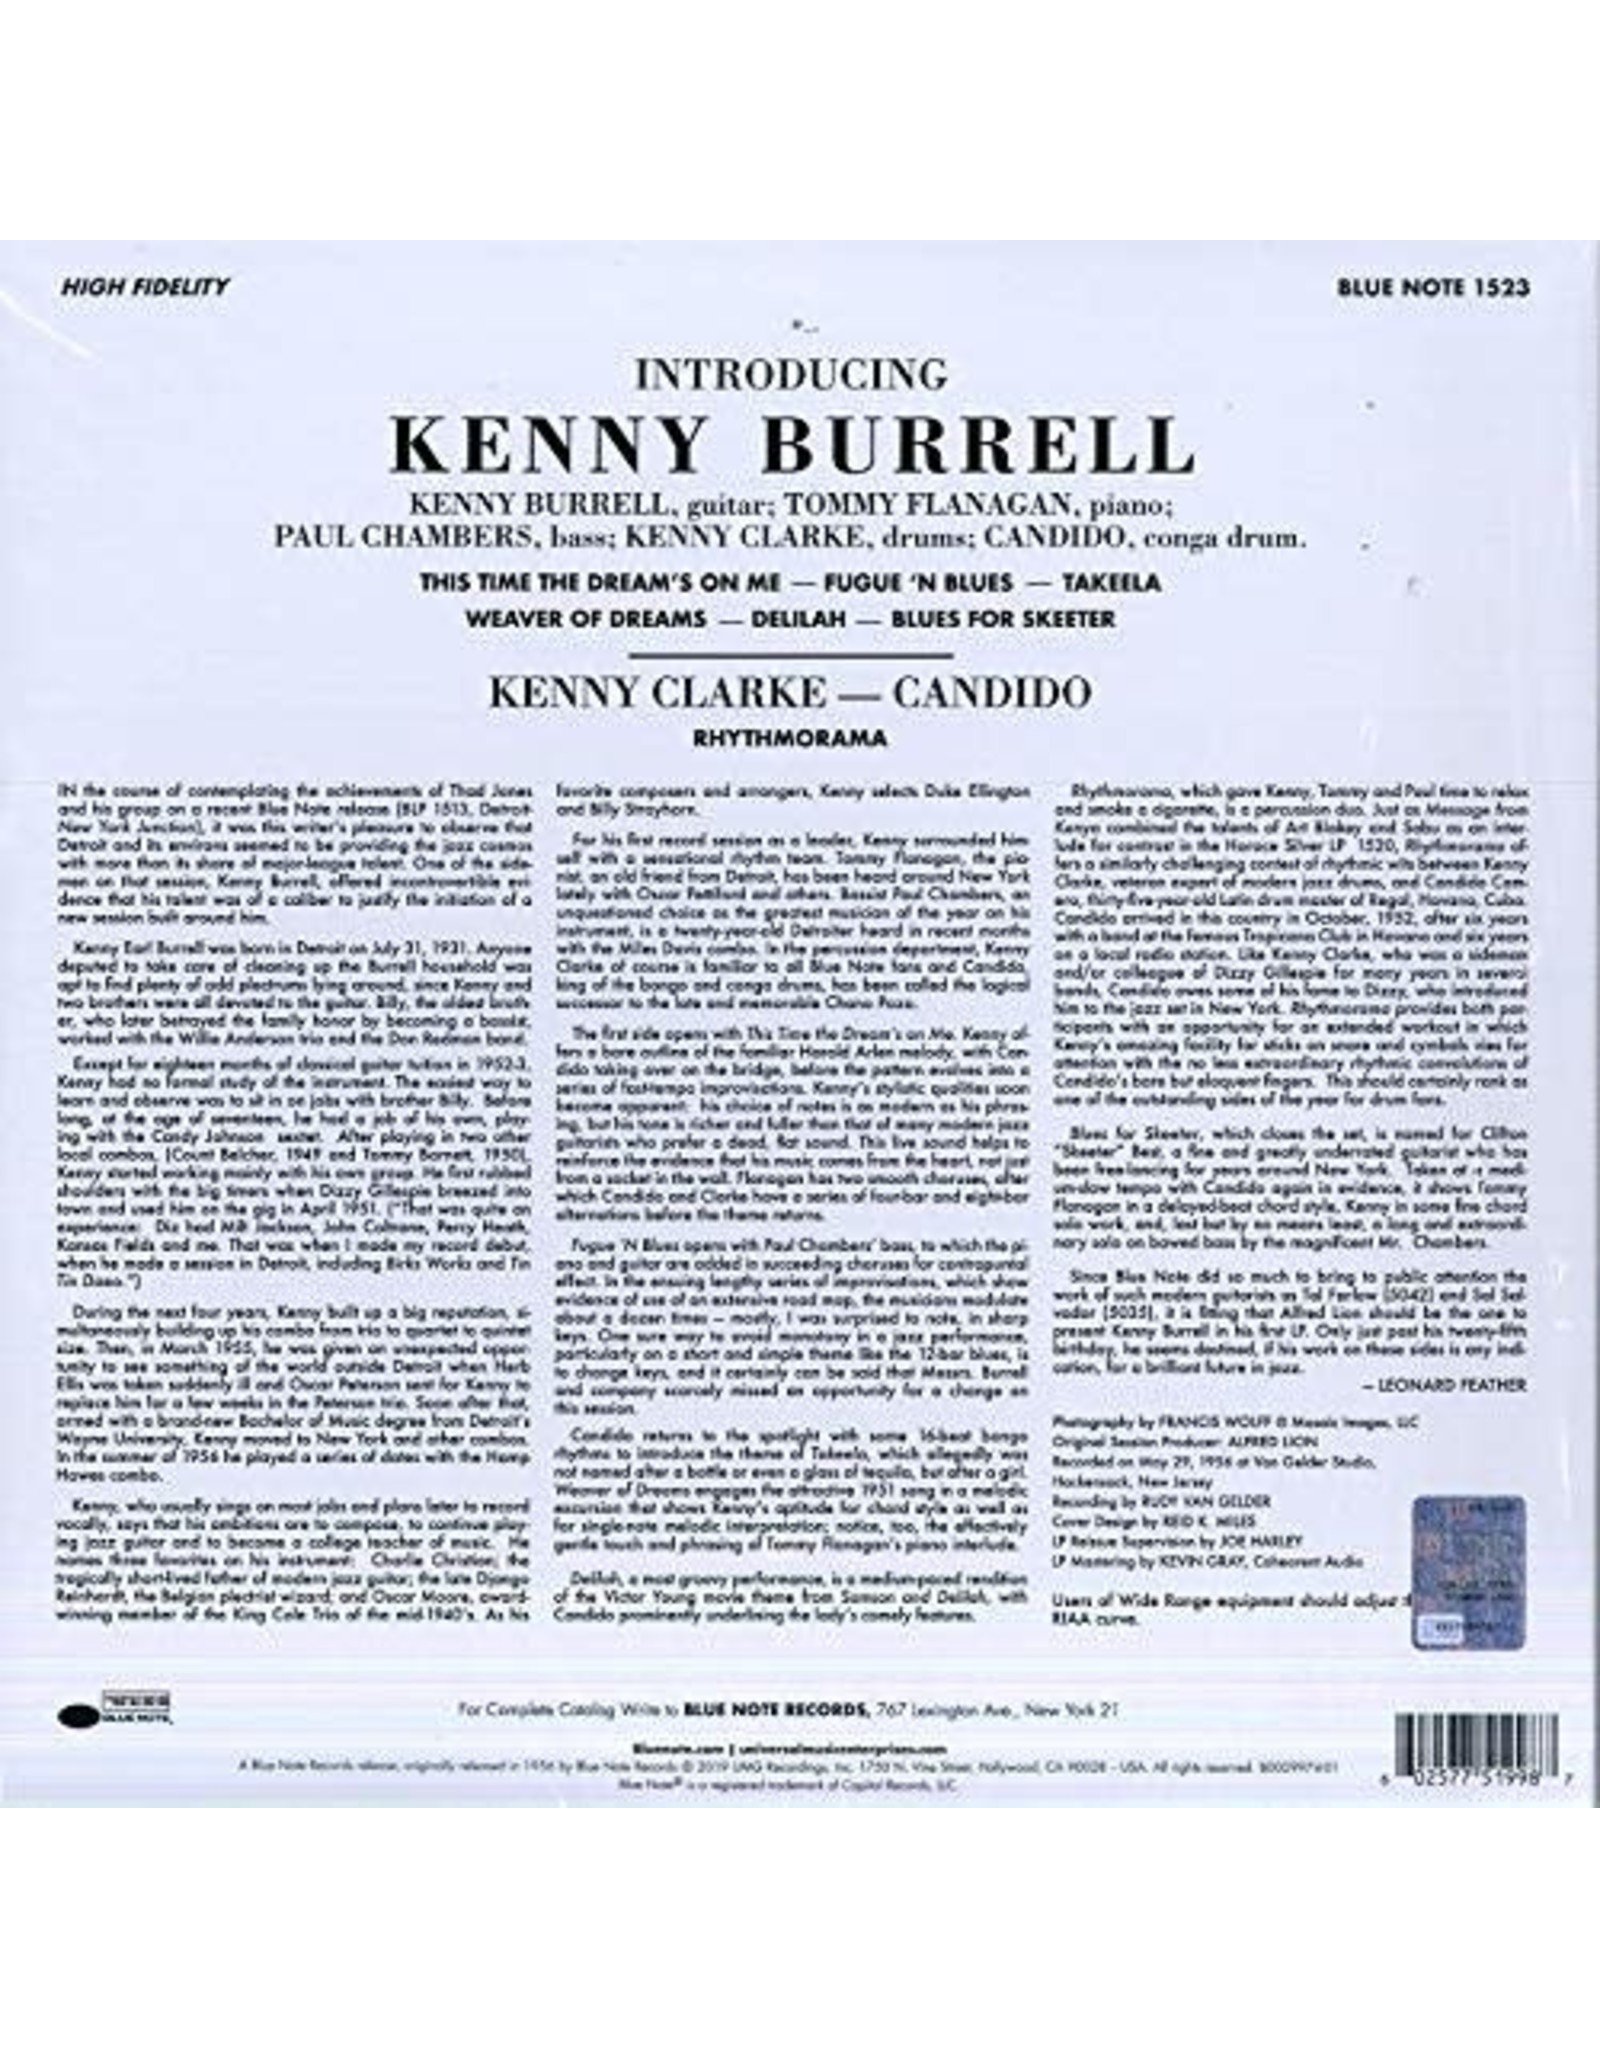 Kenny Burrell - Introducing Kenny Burrell (Blue Note Tone Poet)